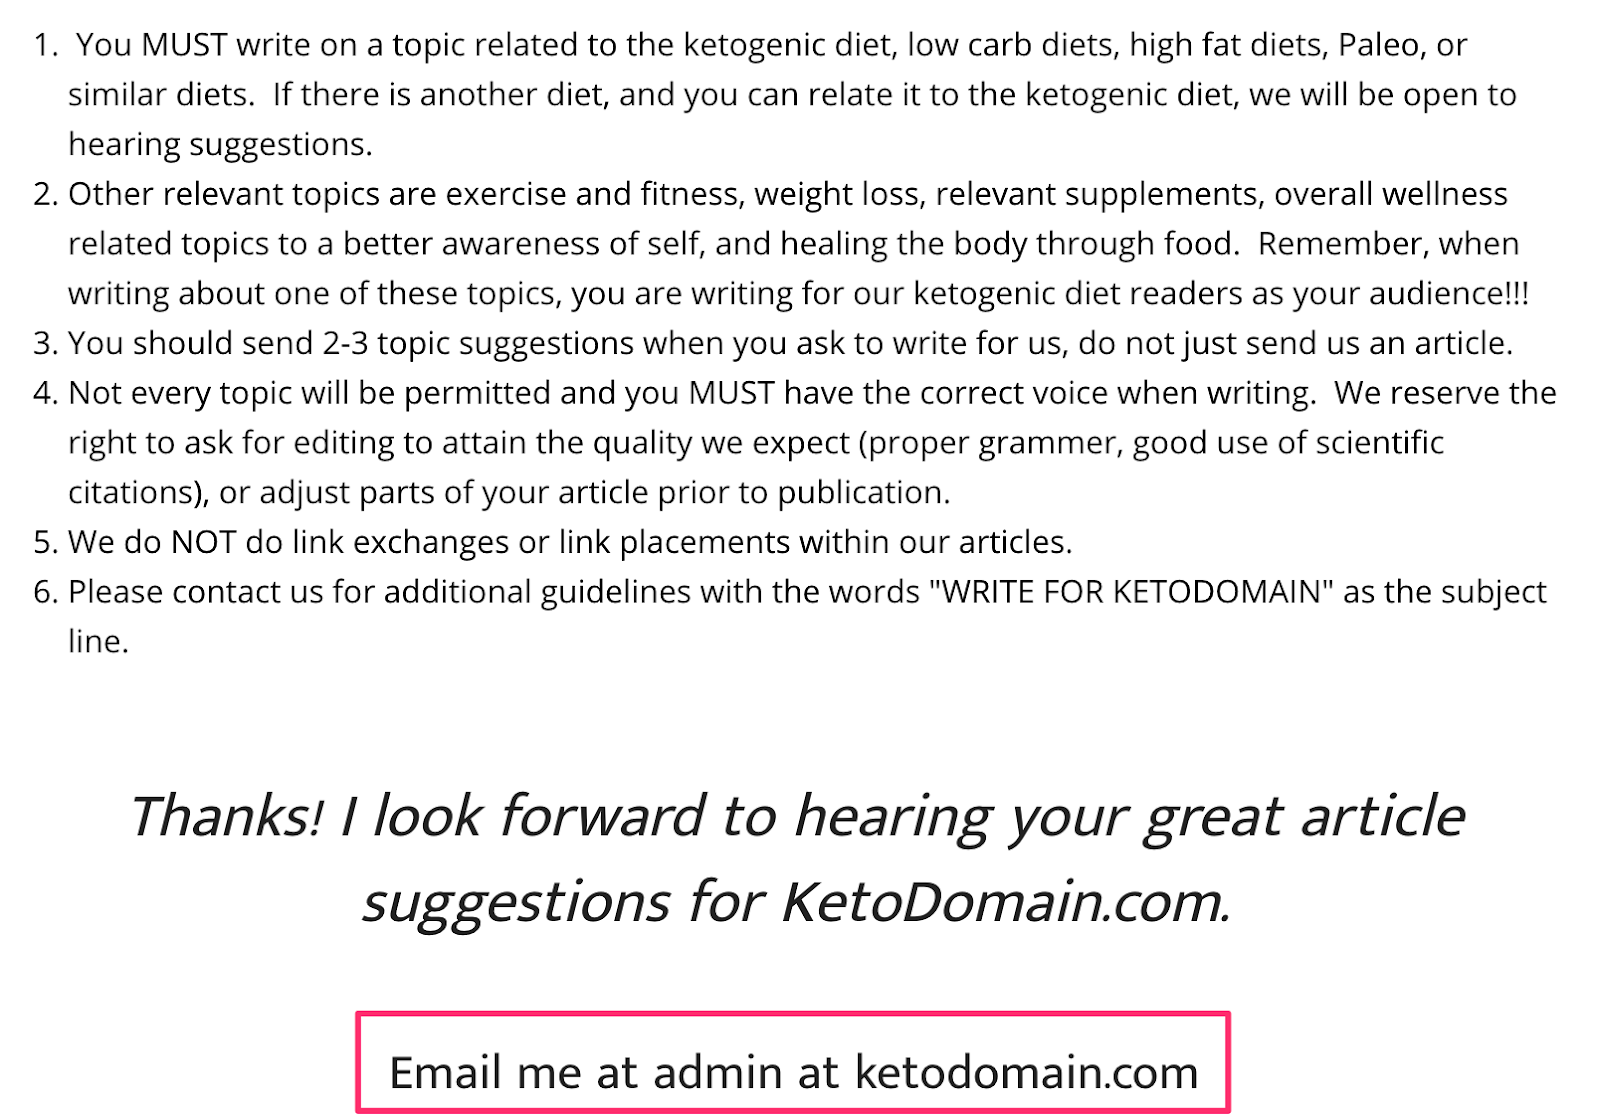 contributor guidelines from ketodomain.com